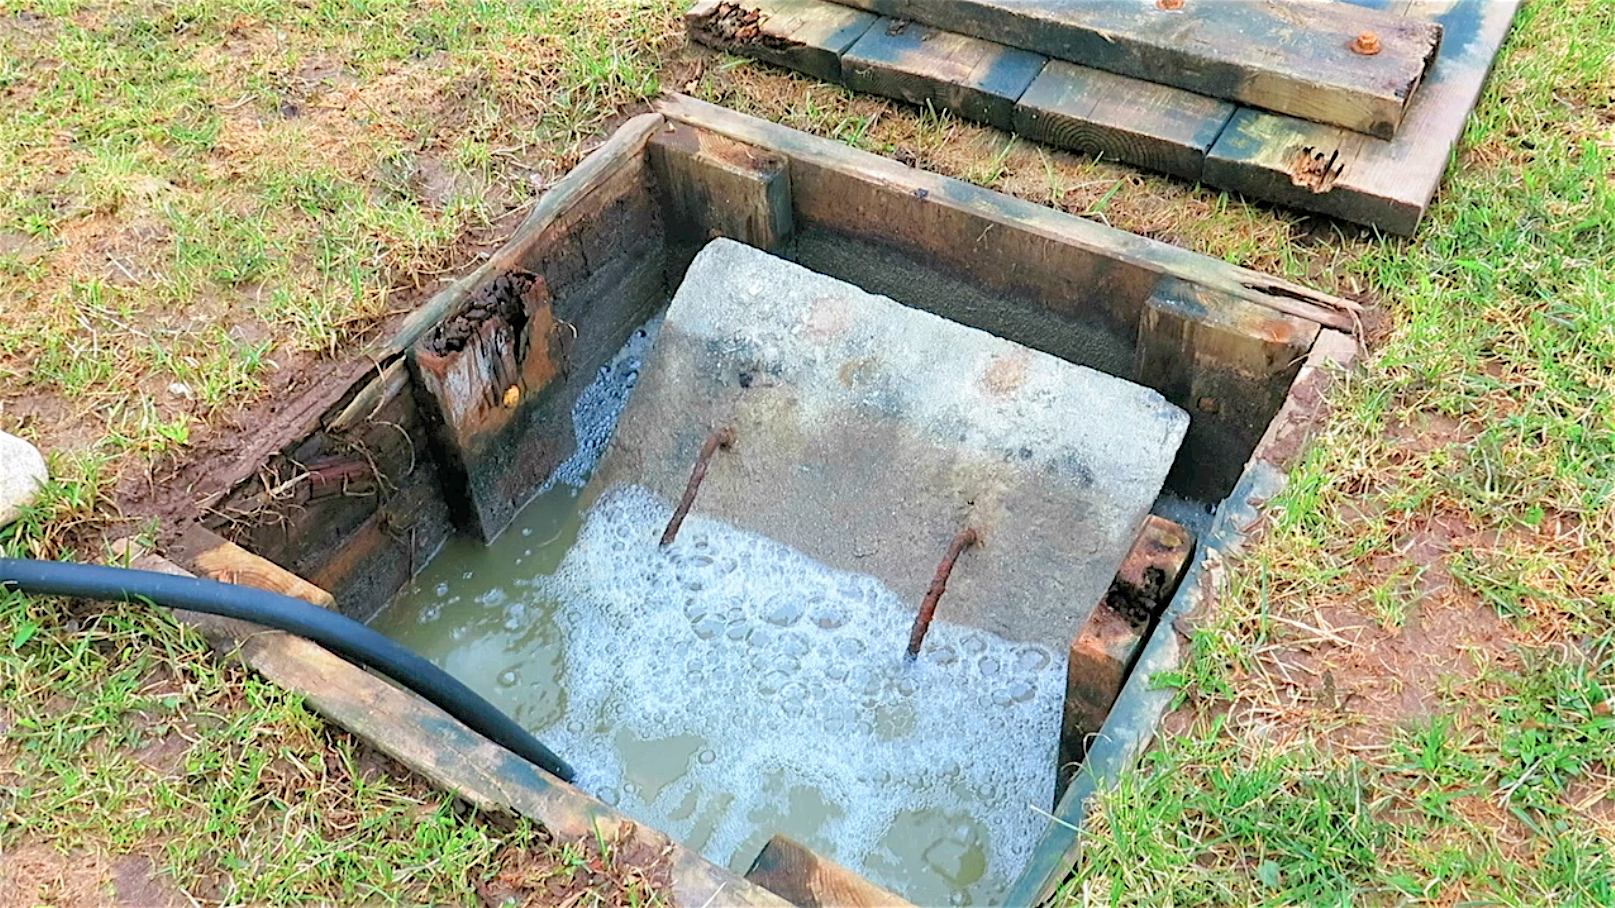 What are field lines for septic tank